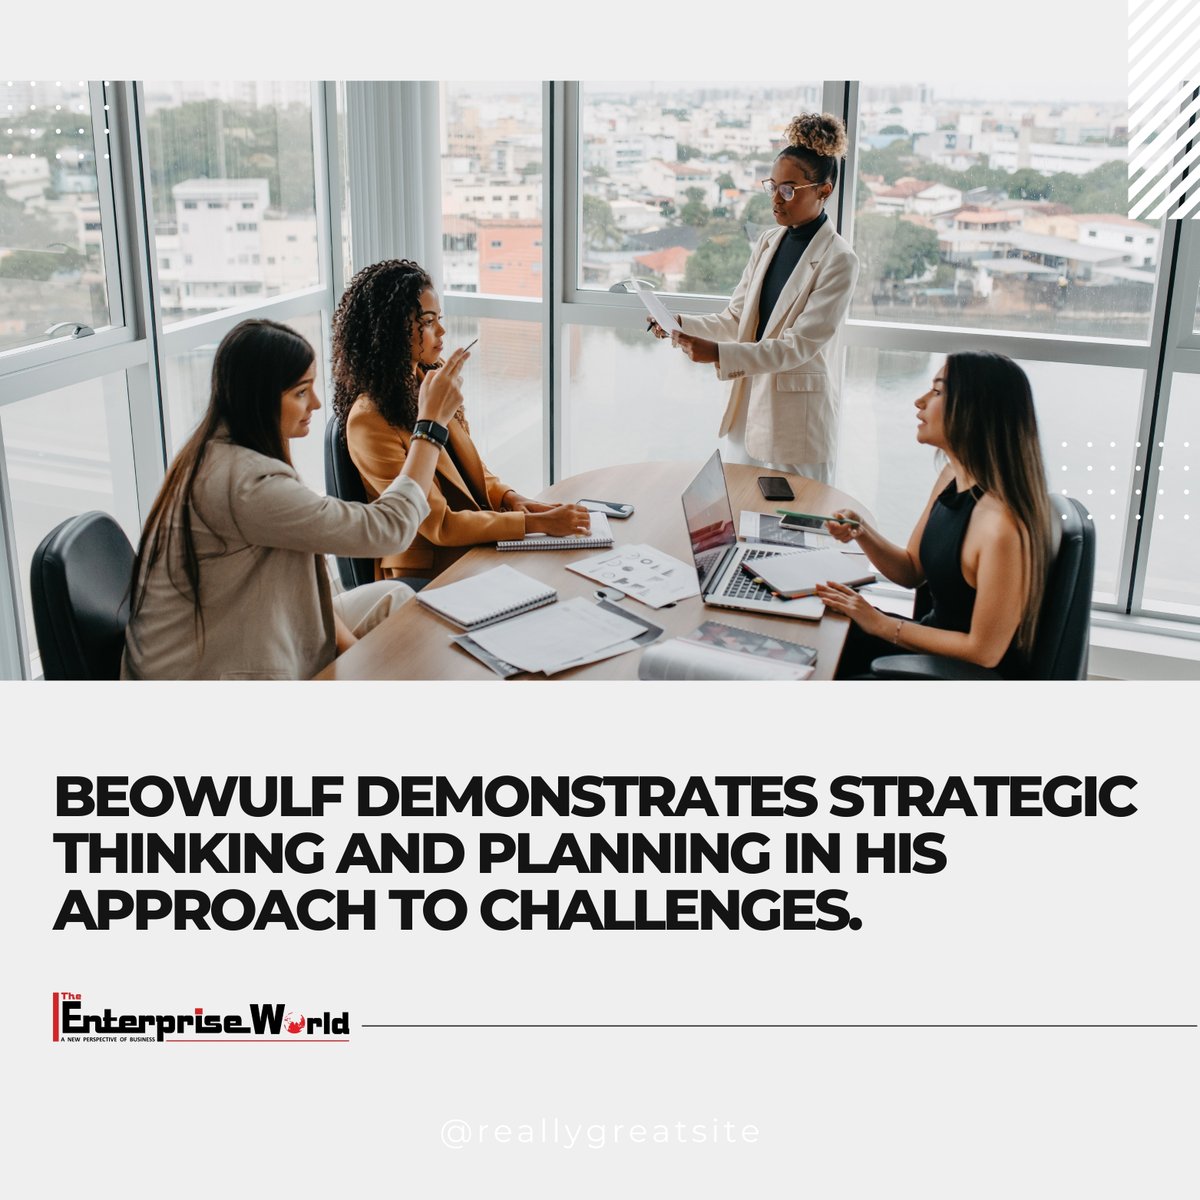 By studying Beowulf's leadership qualities and actions, we can glean valuable insights into effective leadership strategies that are relevant even in modern times. #LeadershipLessons #BeowulfWisdom #ModernLeadership #CourageousLeadership #BraveLeaders #BeowulfLegacy